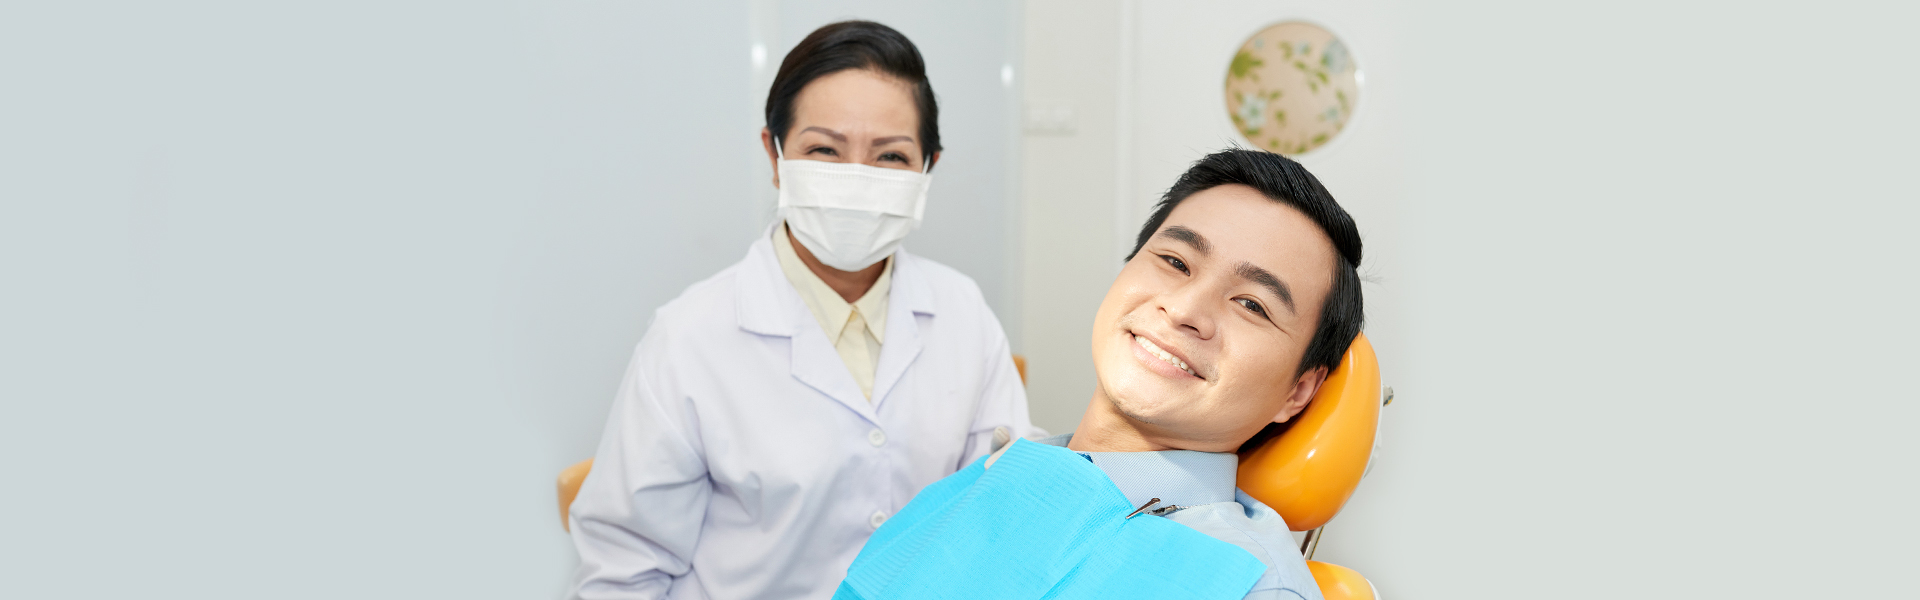 What Are the Most Famous Cosmetic Dentistry Procedures?